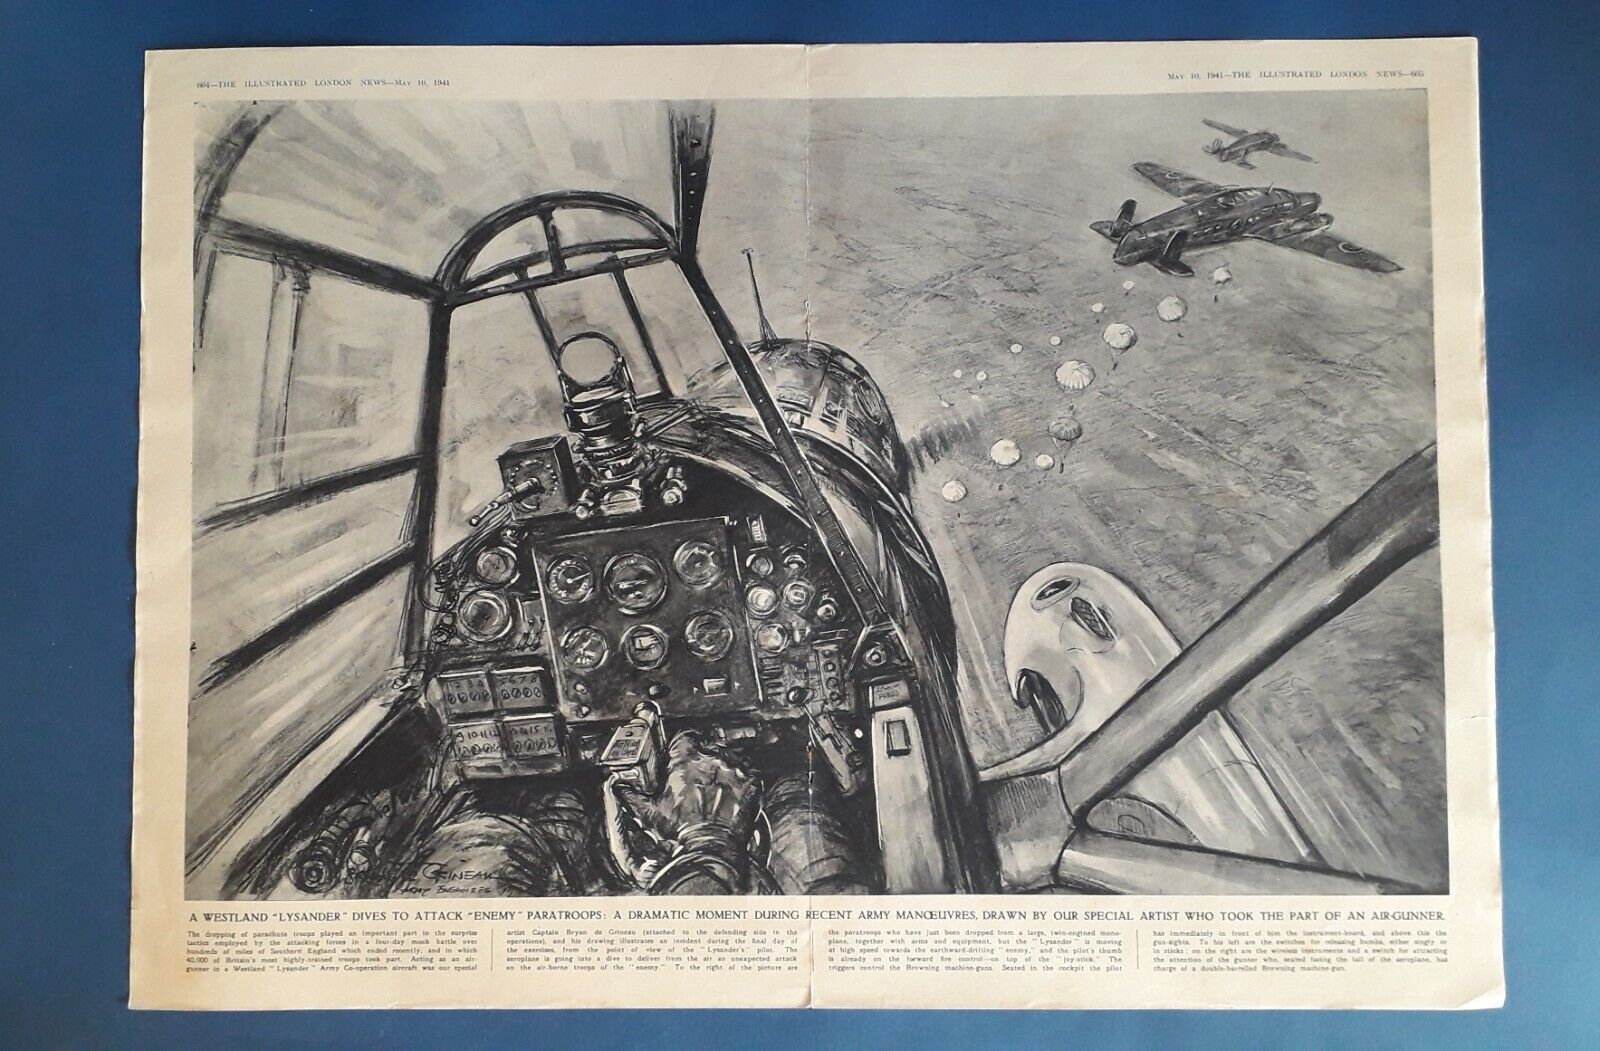 The Illustrated London News May 10, 1941 - Lysander Poster by Captain de Grineau